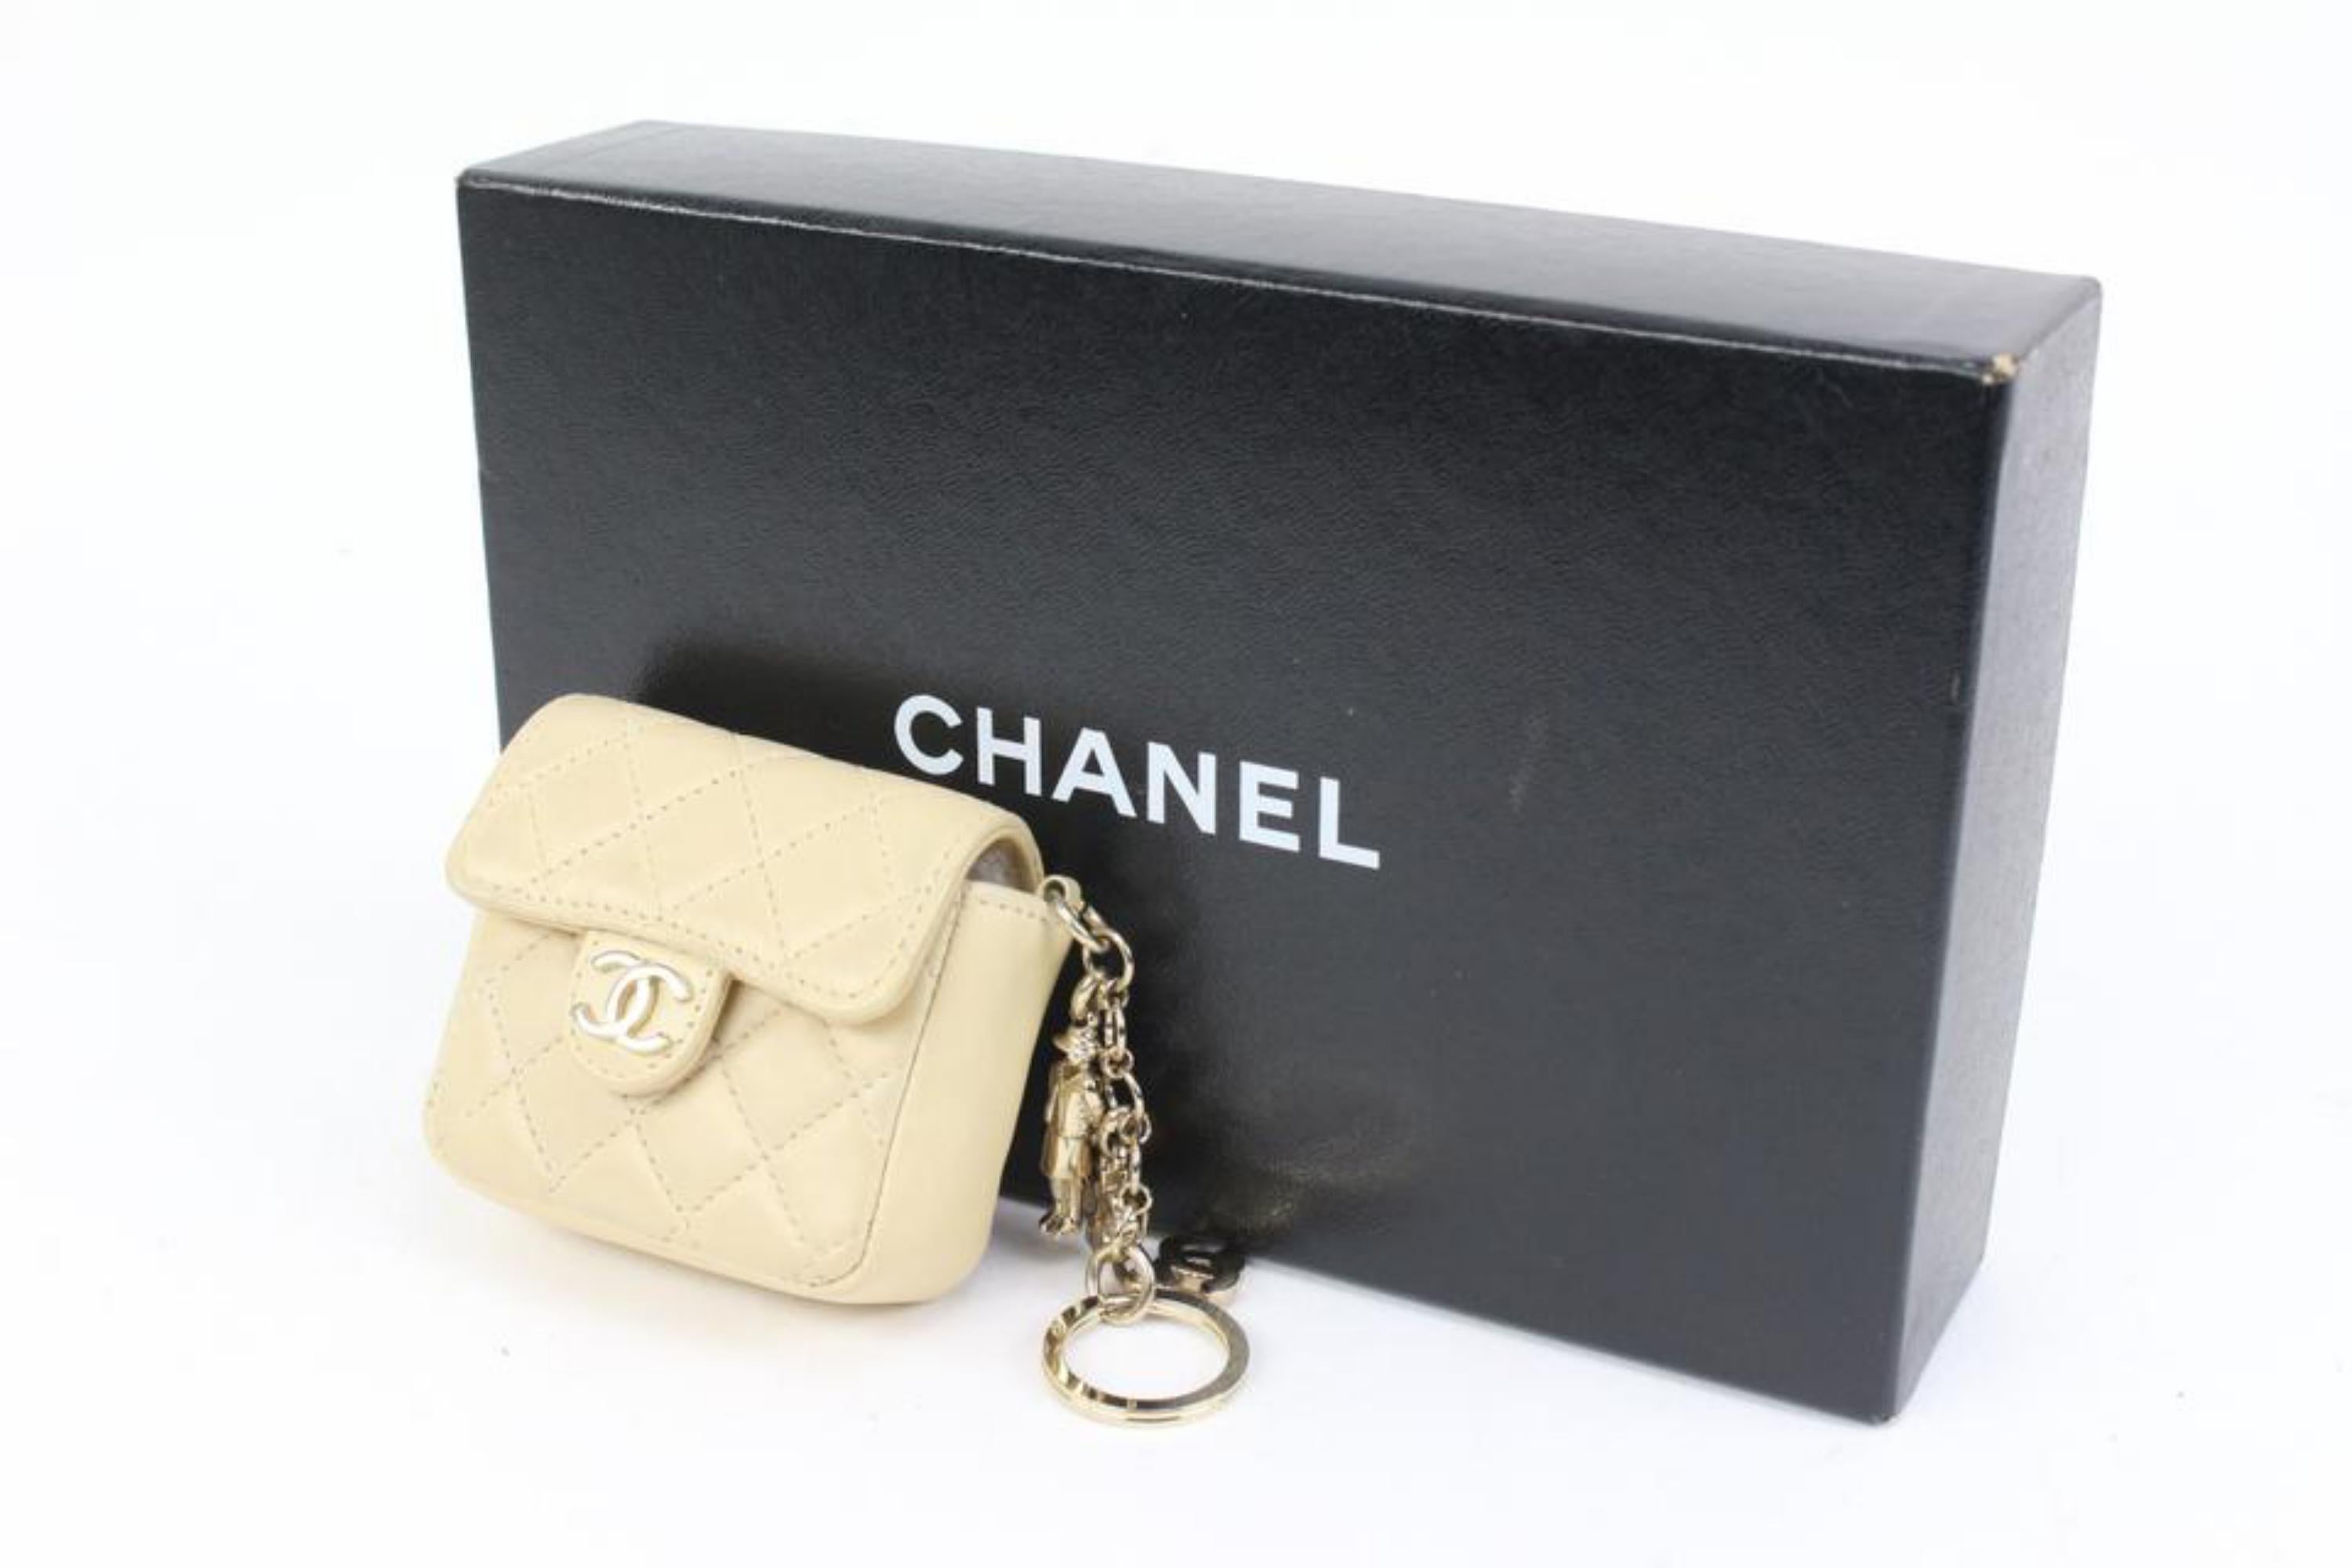 Chanel Light Beige Cream Quilted Leather Micro Flap Charm Bag Mini 48cz47
Date Code/Serial Number: 7441289
Made In: France
Measurements: Length:  3